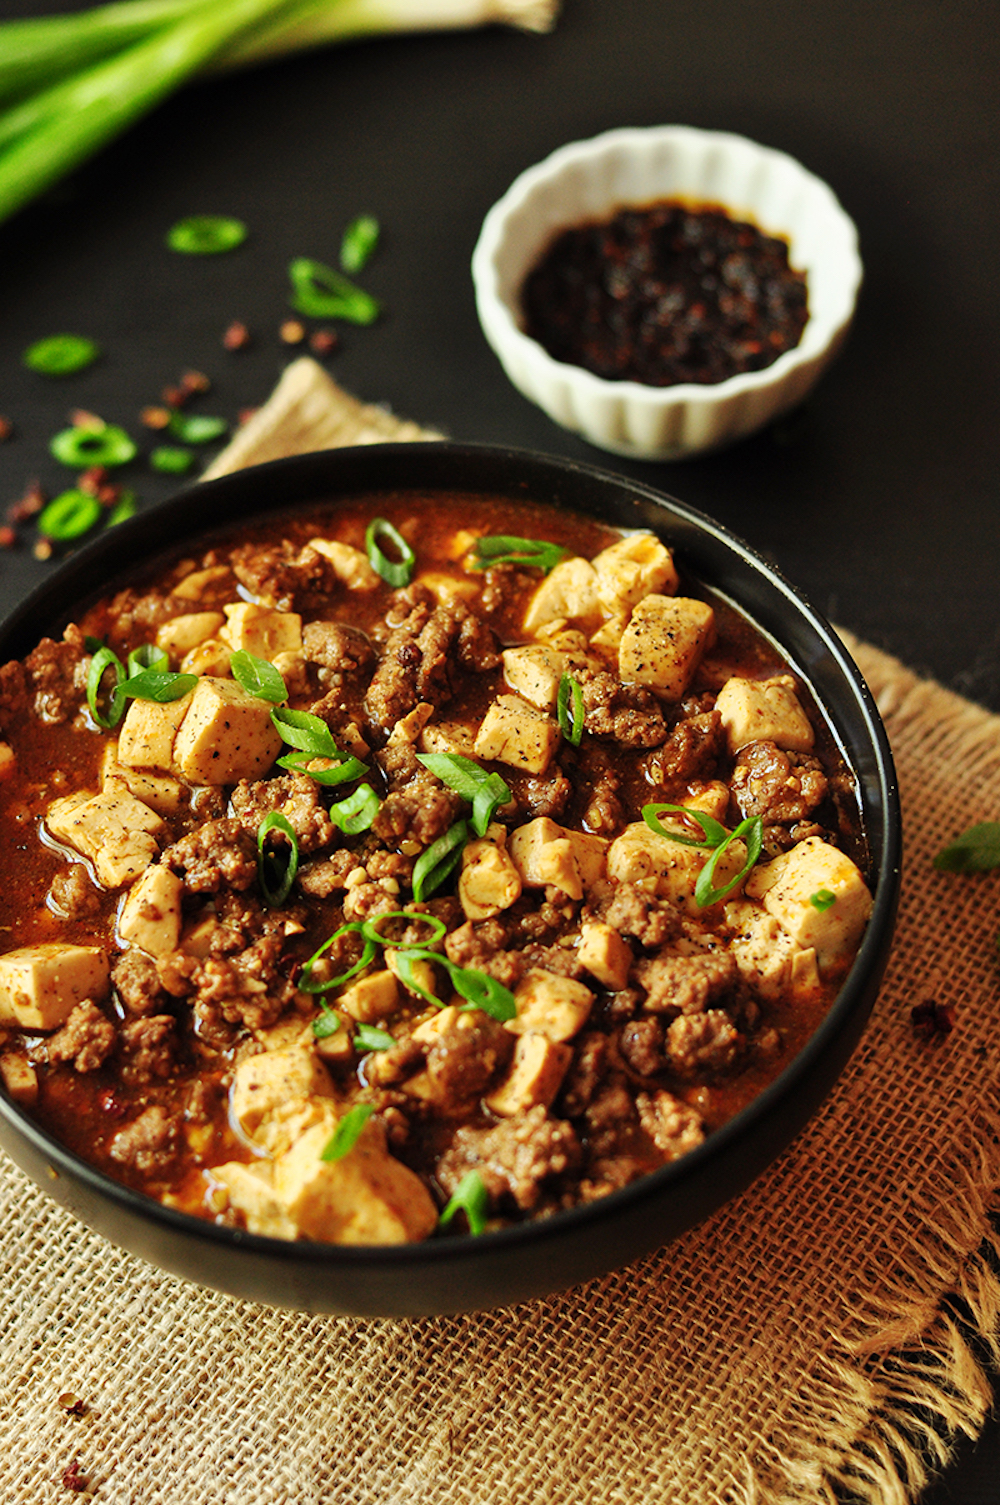 Traditional Mapo Tofu made easy and gluten-free with homemade hot chili oil and pepper solids, then simmered in hearty bone broth!